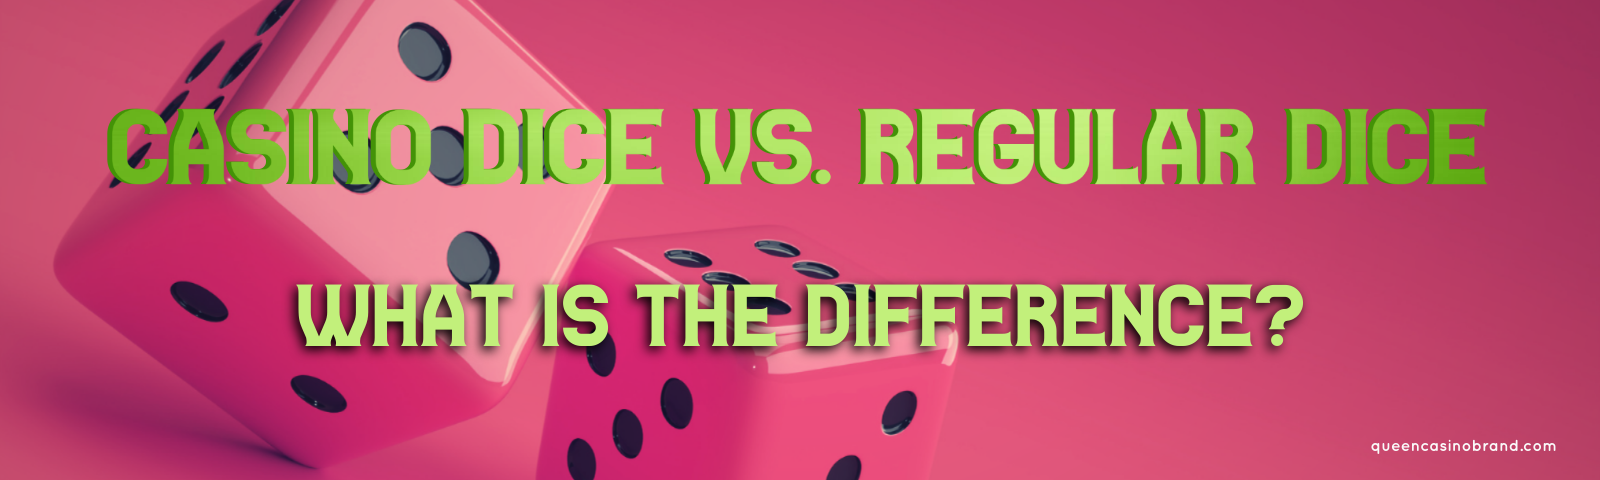 Casino Dice vs. Regular Dice: What is the difference? | Queen Casino Brand